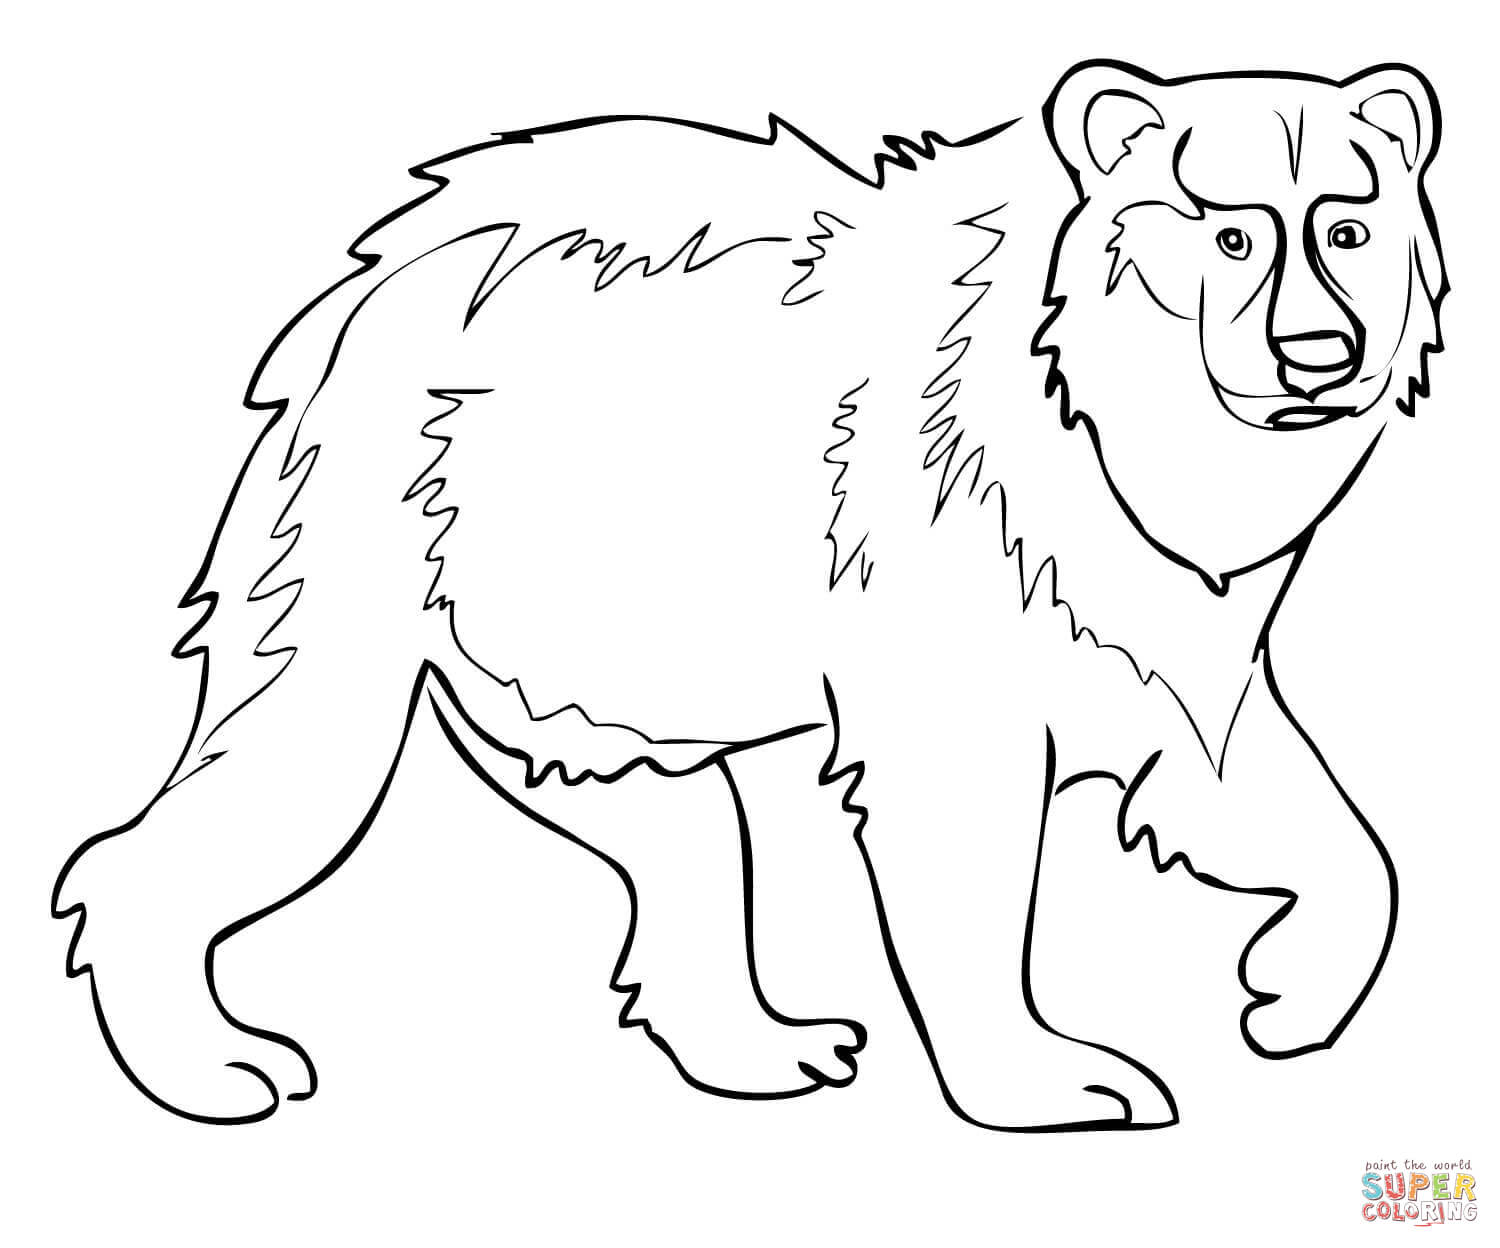 Eurasian Brown Bear coloring page | Free Printable Coloring Pages